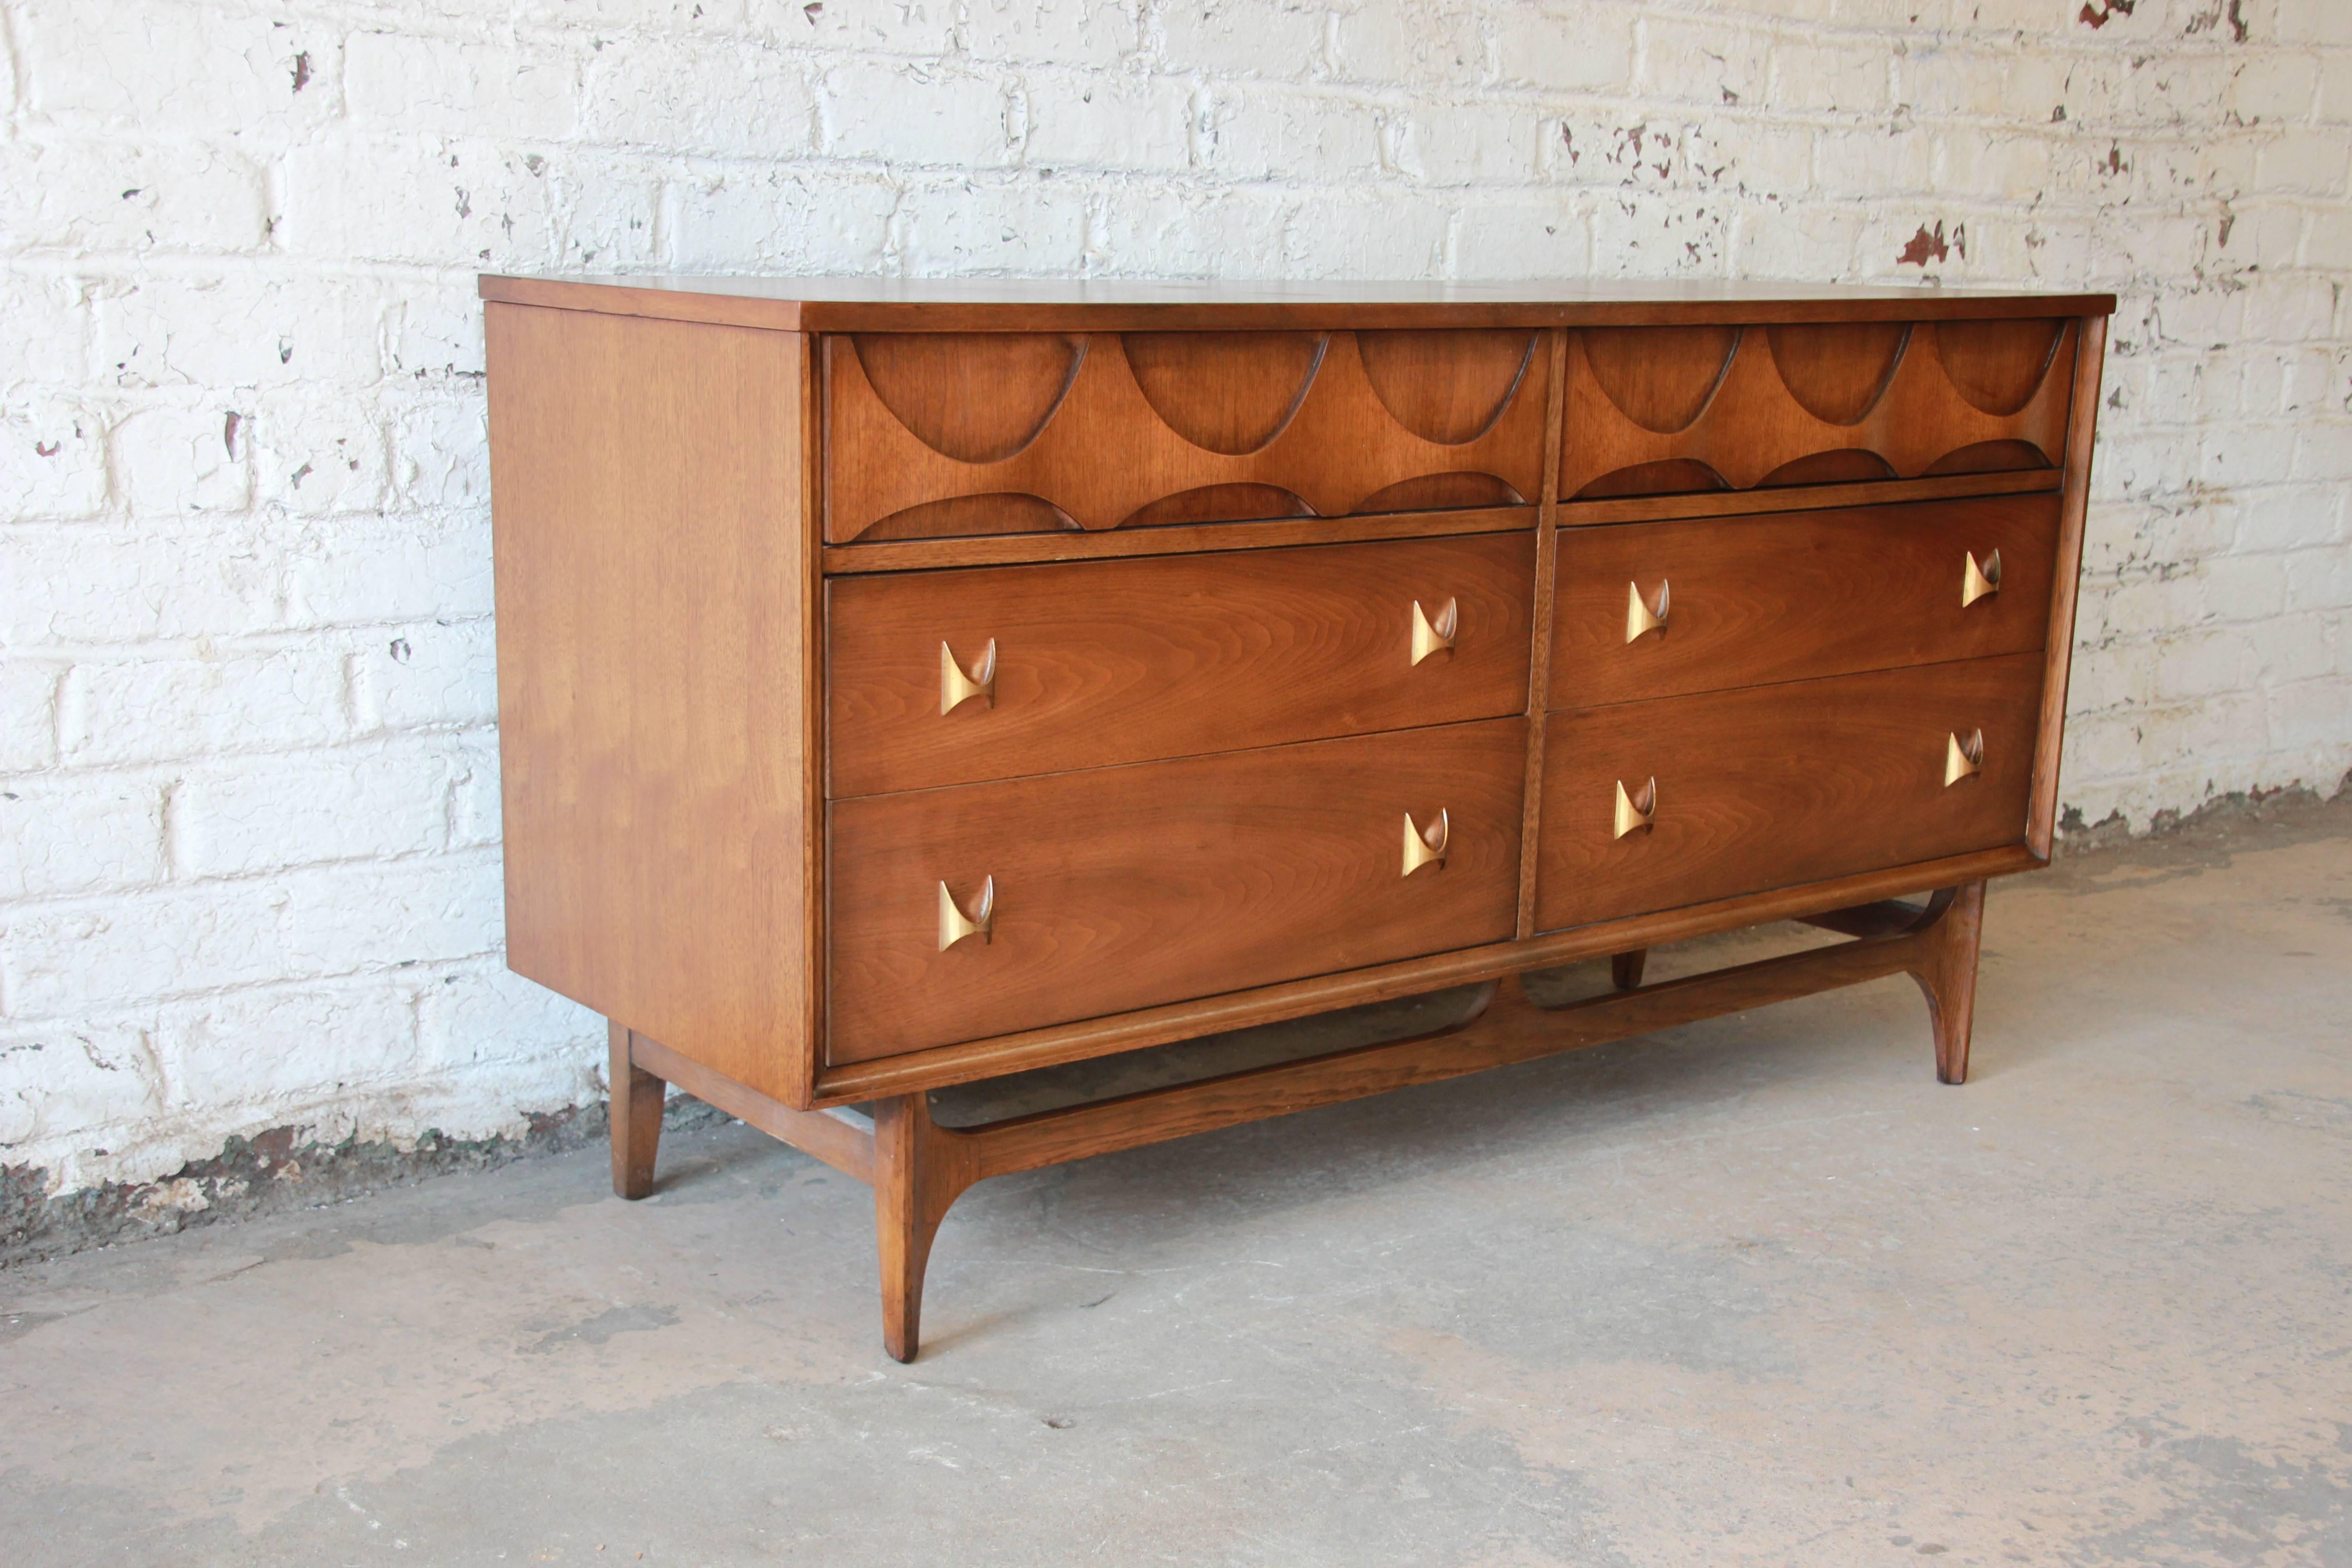 An exceptional Broyhill Brasilia six-drawer Mid-Century Modern sculpted walnut dresser or credenza. The dresser features gorgeous walnut wood grain, with sculpted arches and original pulls designed by Oscar Niemeyer. It offers ample room for storage